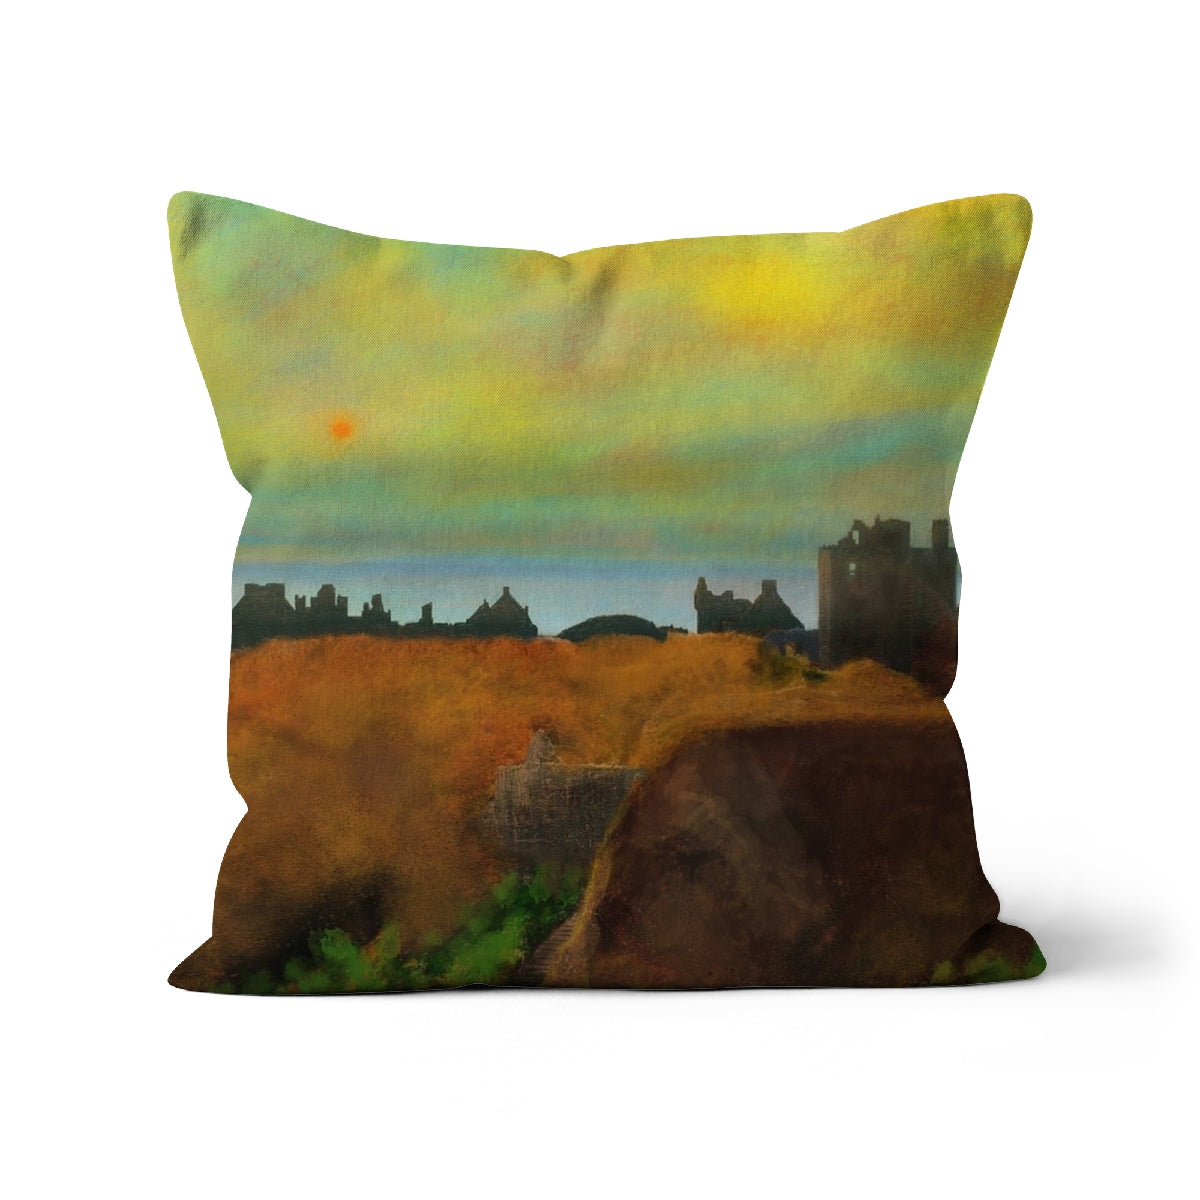 Dunnottar Castle Art Gifts Cushion-Cushions-Historic & Iconic Scotland Art Gallery-Canvas-24"x24"-Paintings, Prints, Homeware, Art Gifts From Scotland By Scottish Artist Kevin Hunter